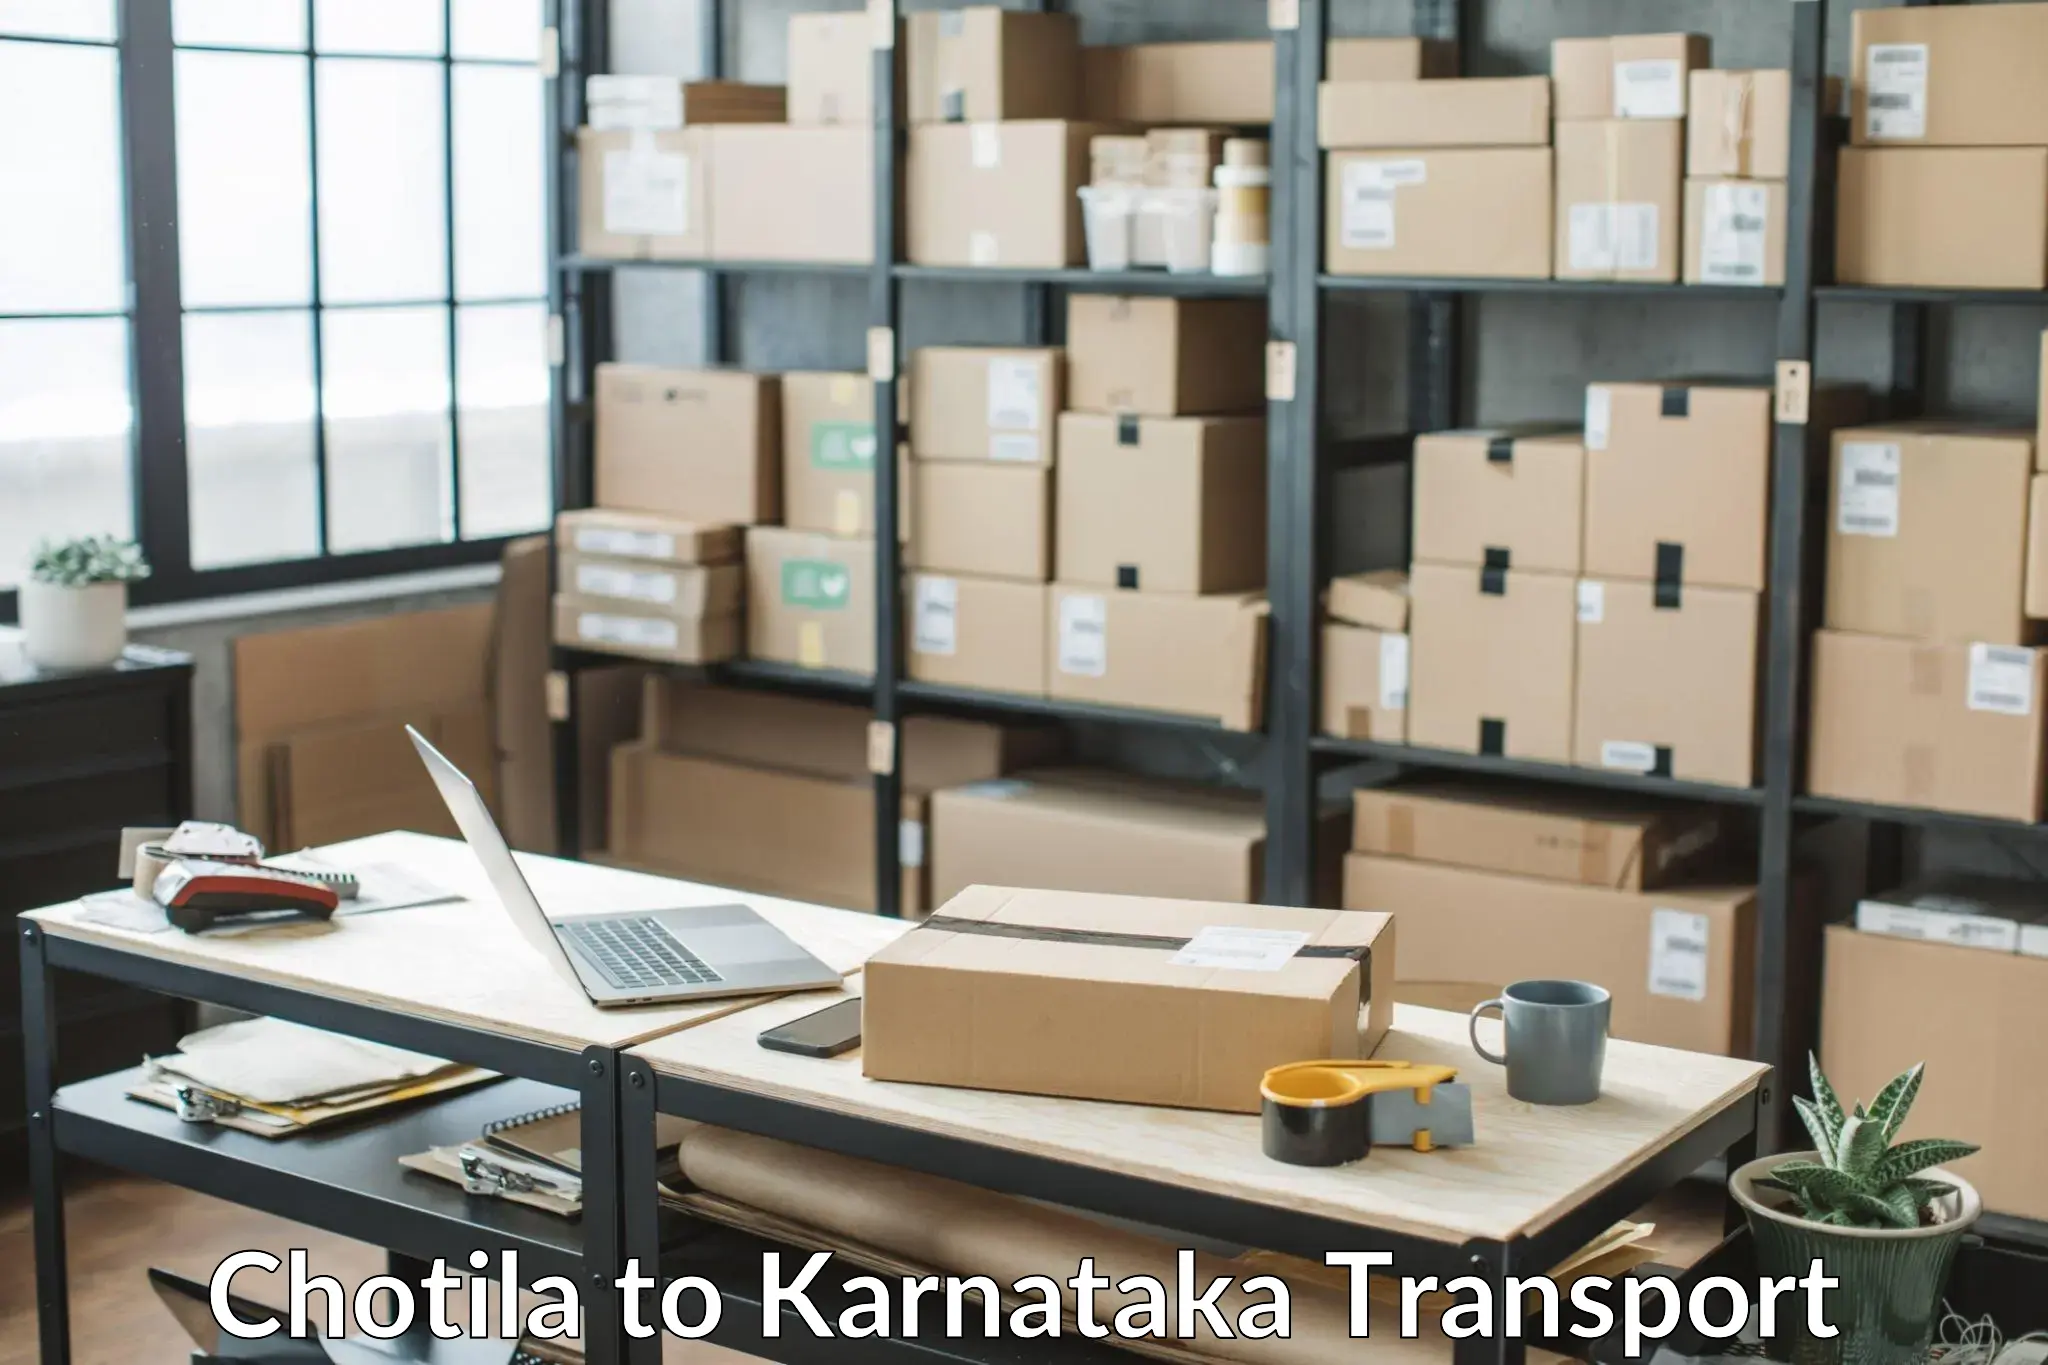 Commercial transport service Chotila to Surathkal